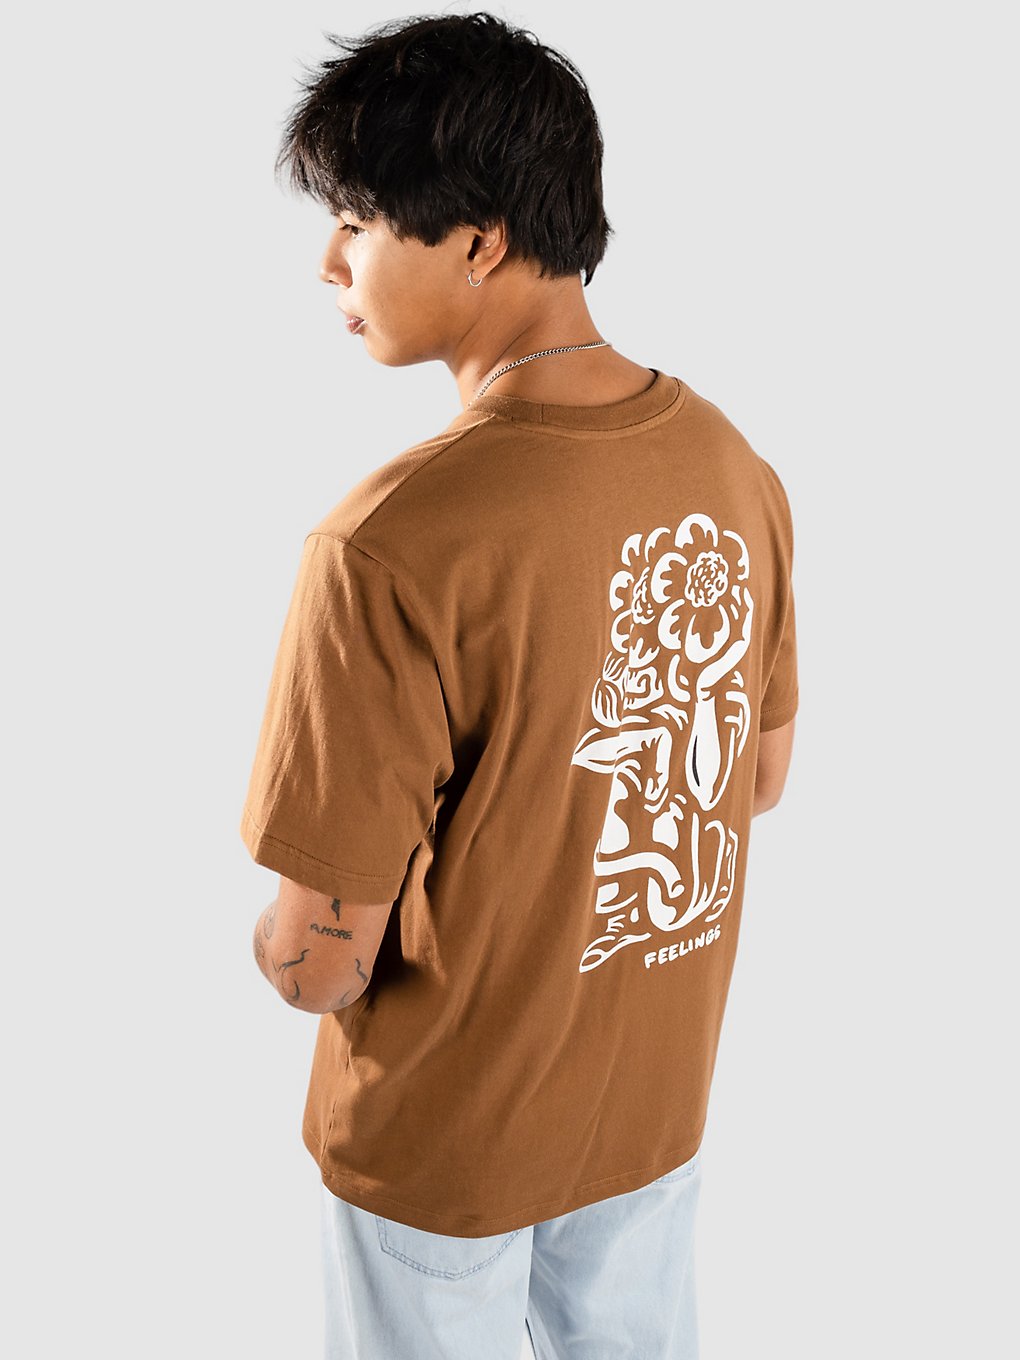 And Feelings Weight T-Shirt brown toffee kaufen